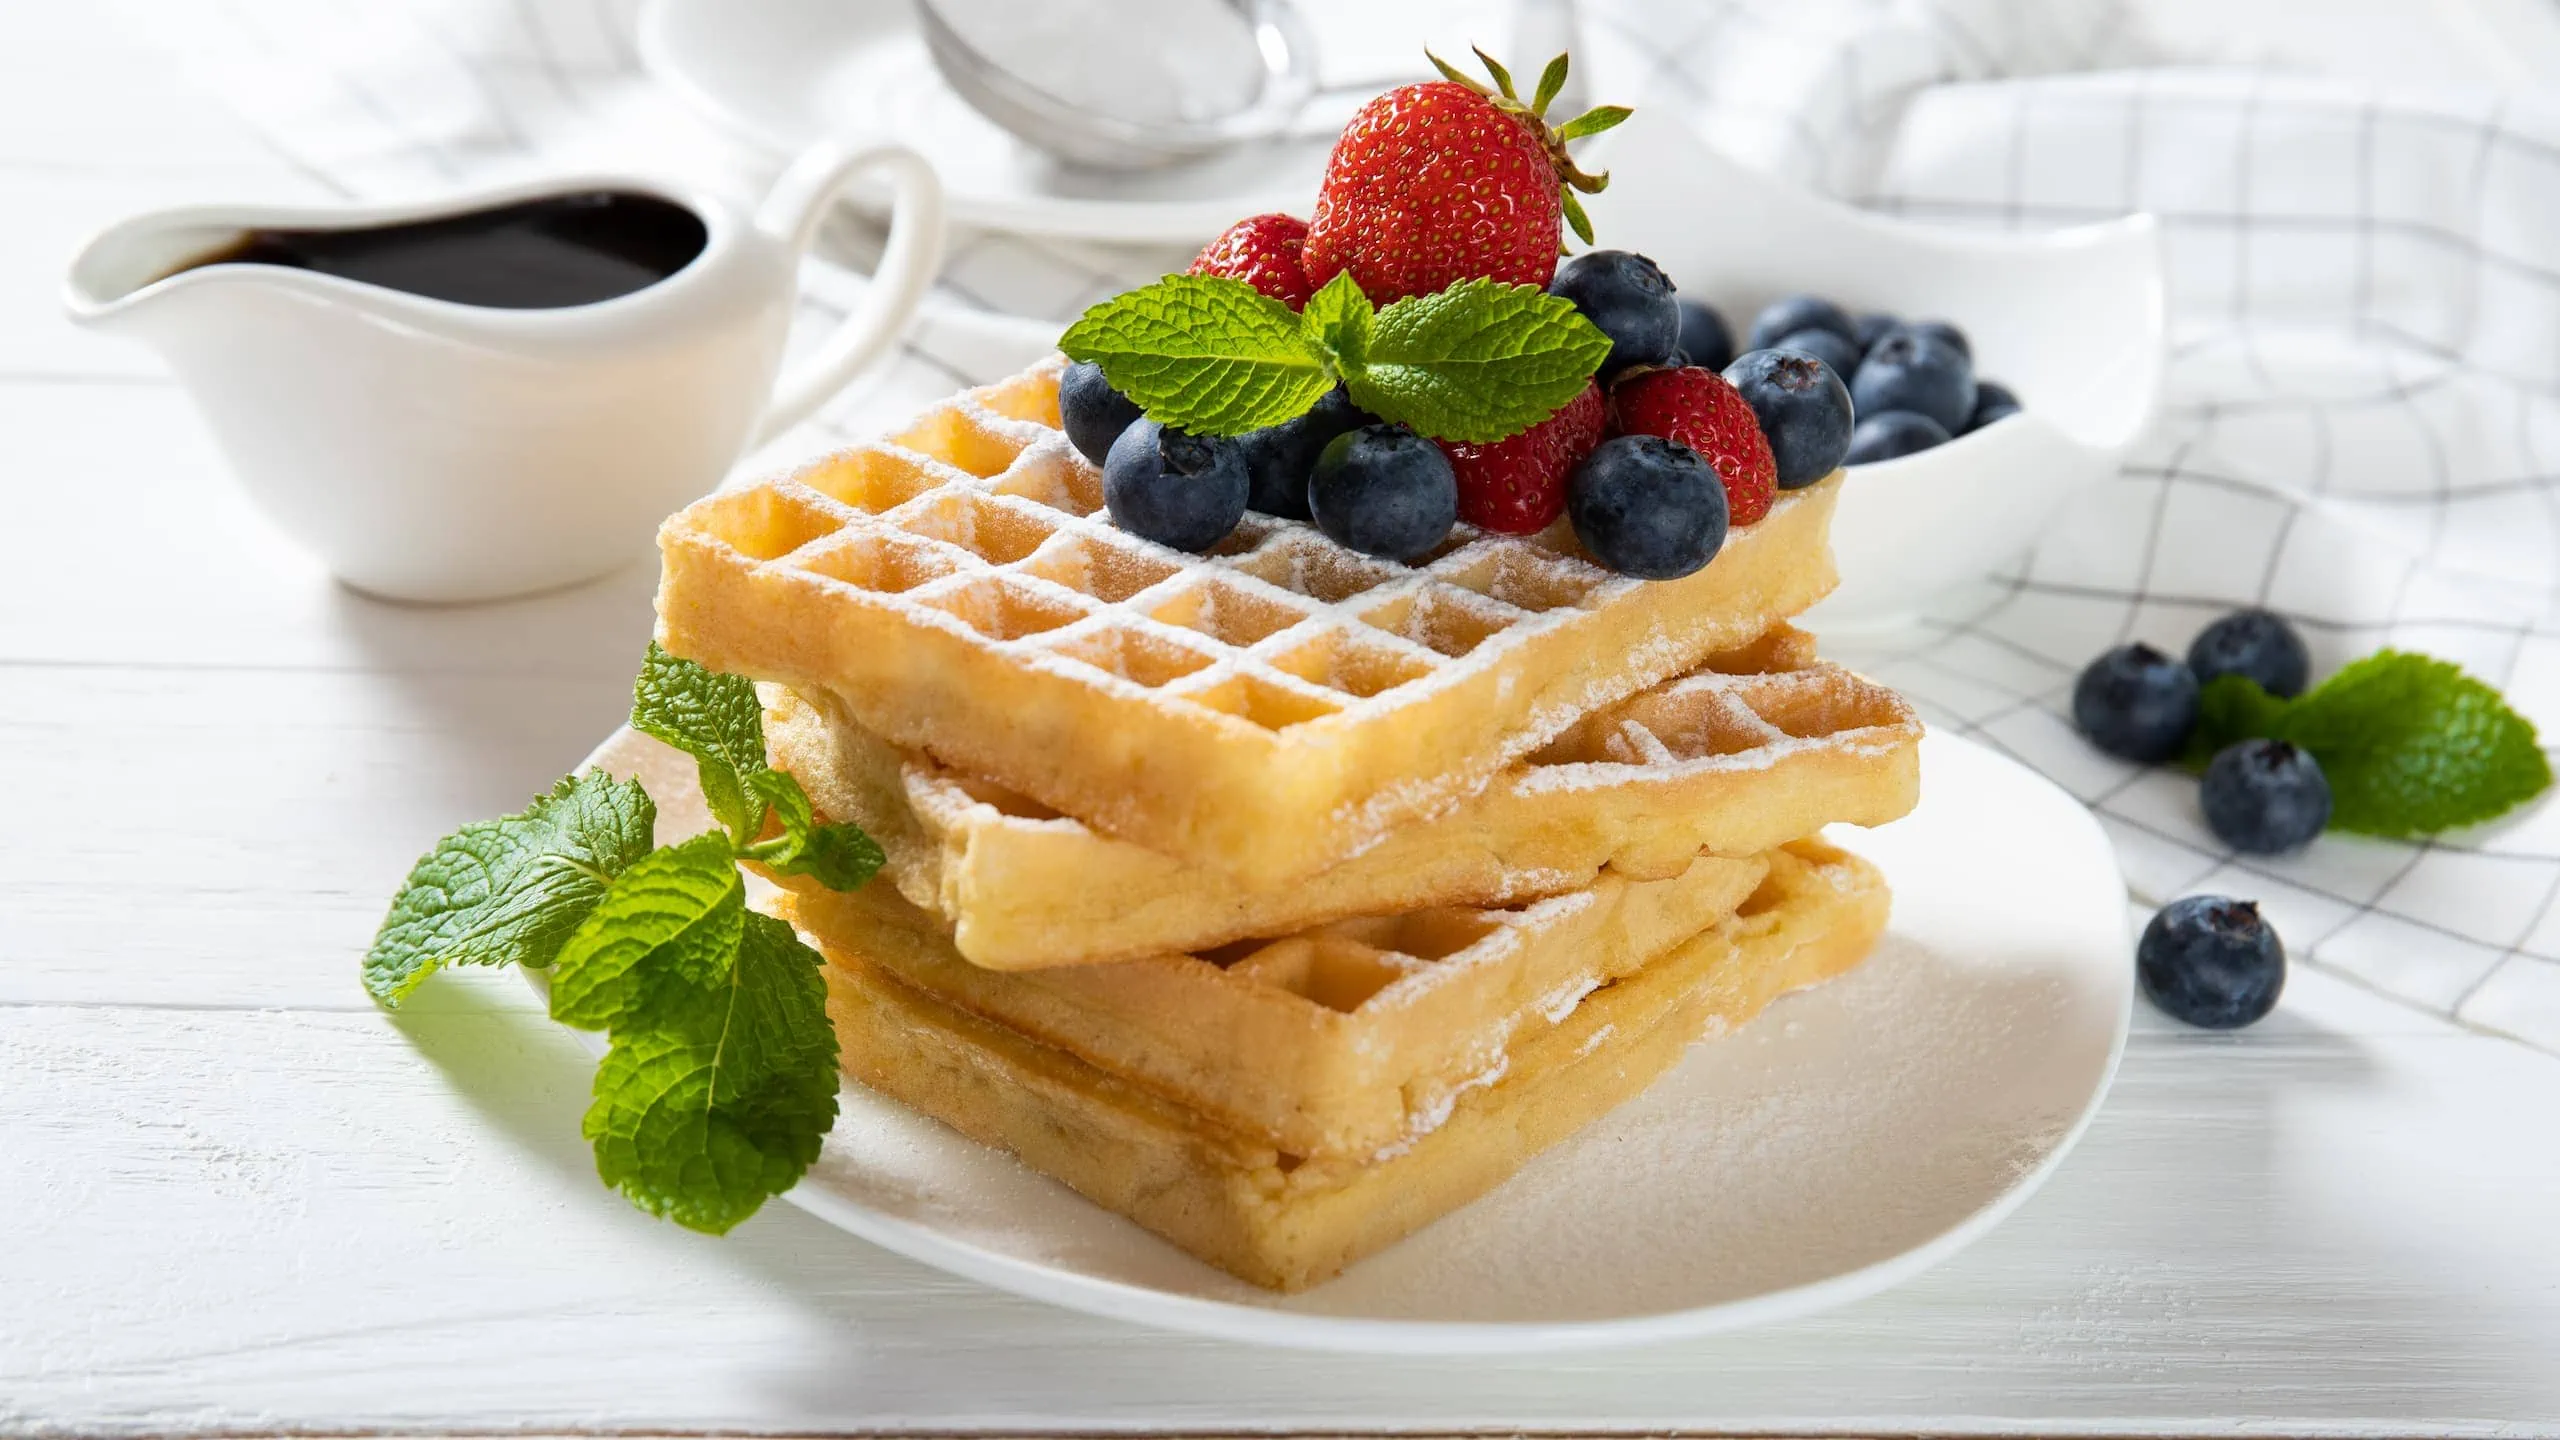 Delicious waffle without baking powder with strawberries, blueberries, and mint